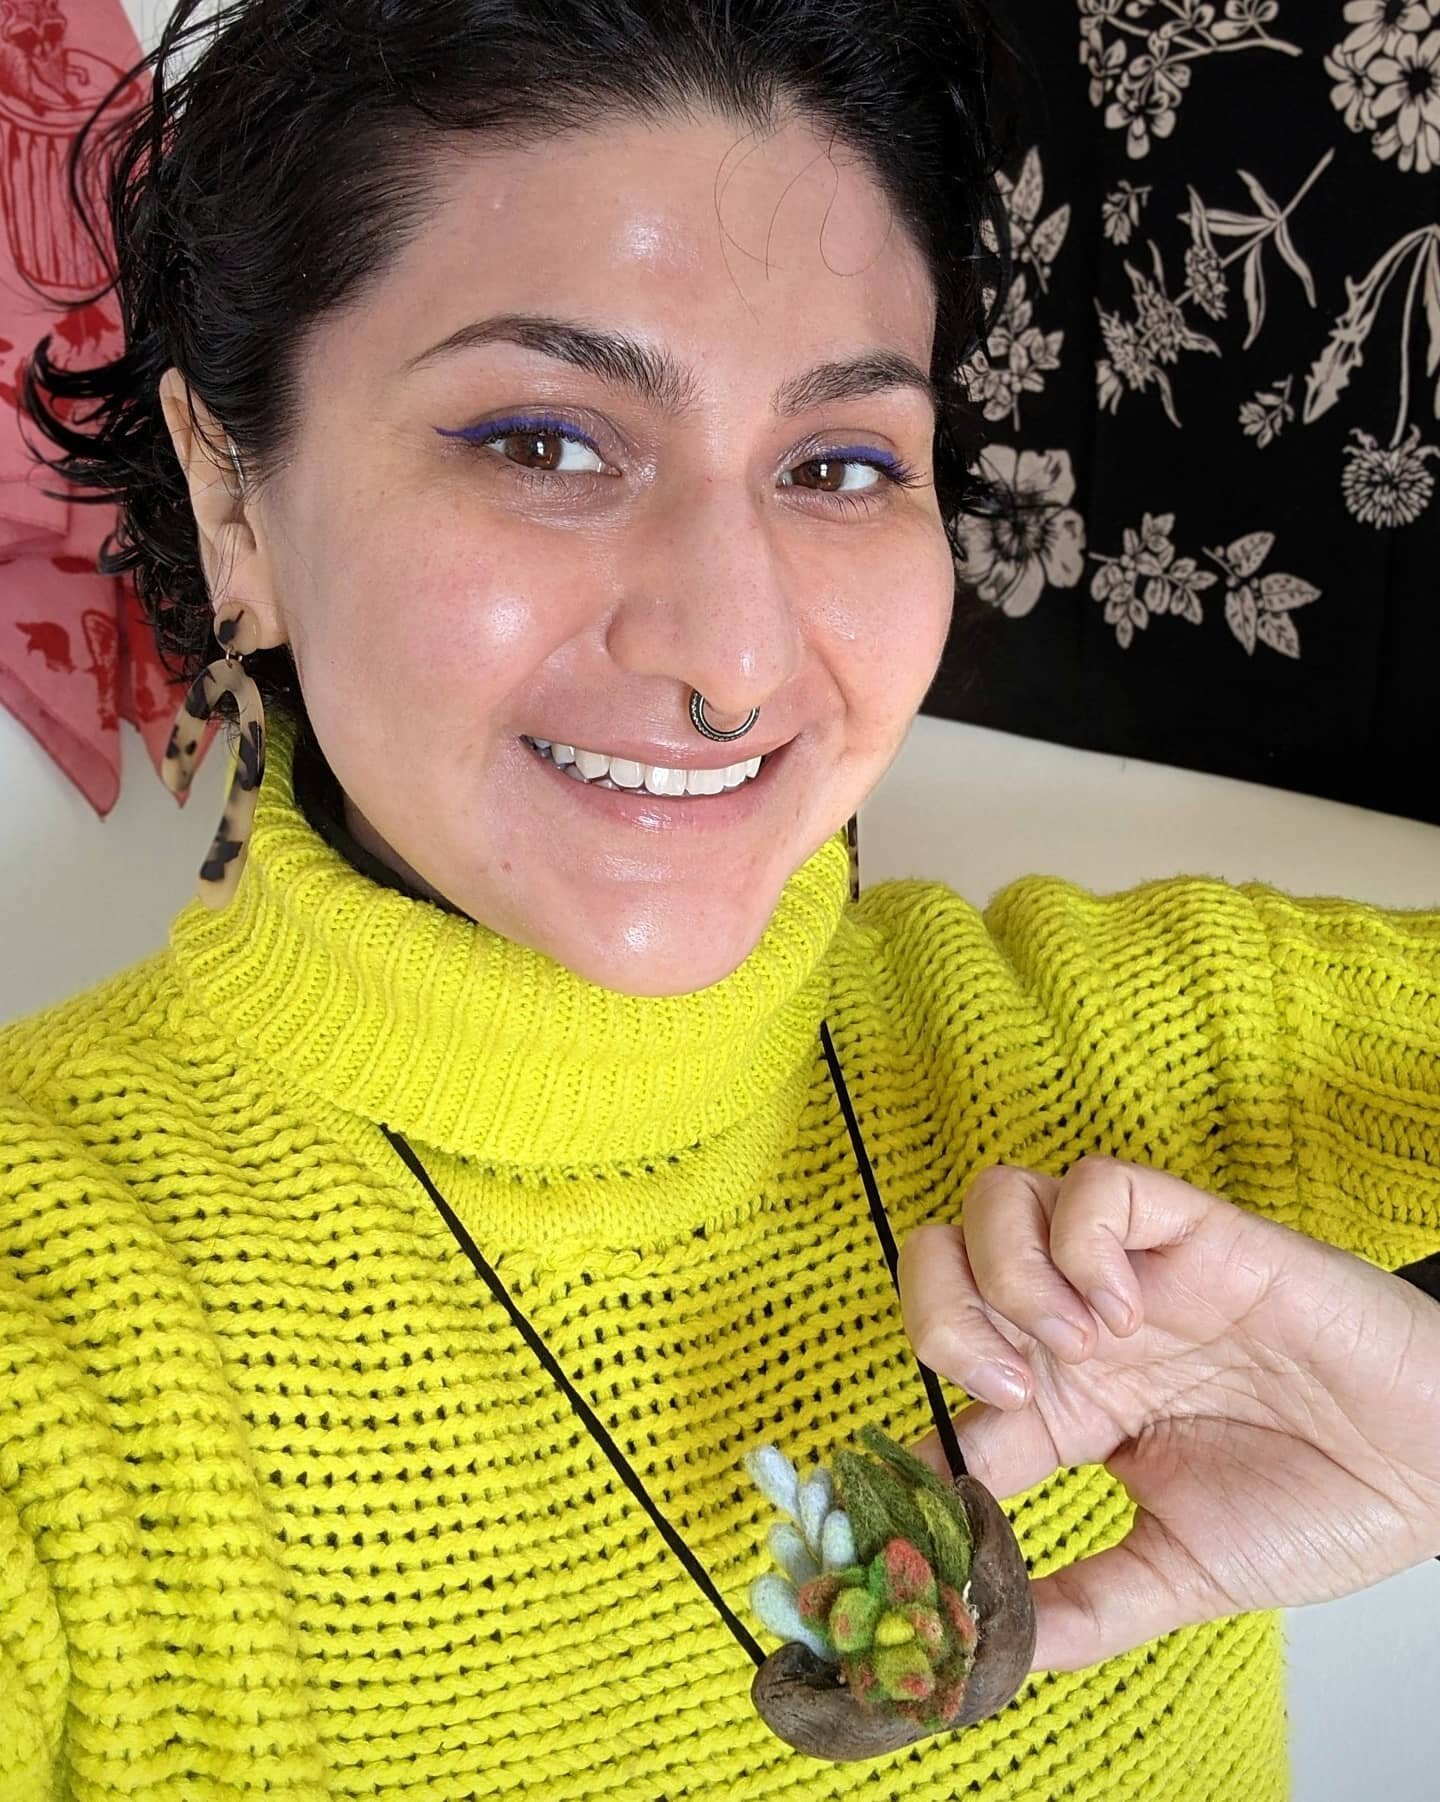 I tried styling this adorable felted succulent necklace! Learn how to make your own in my first-ever @textilesatlillstreet workshop (coming in April). How would you wear these cuties?

#lillstreetartcenter #fiberartist #felt #handmade #diycrafts #suc